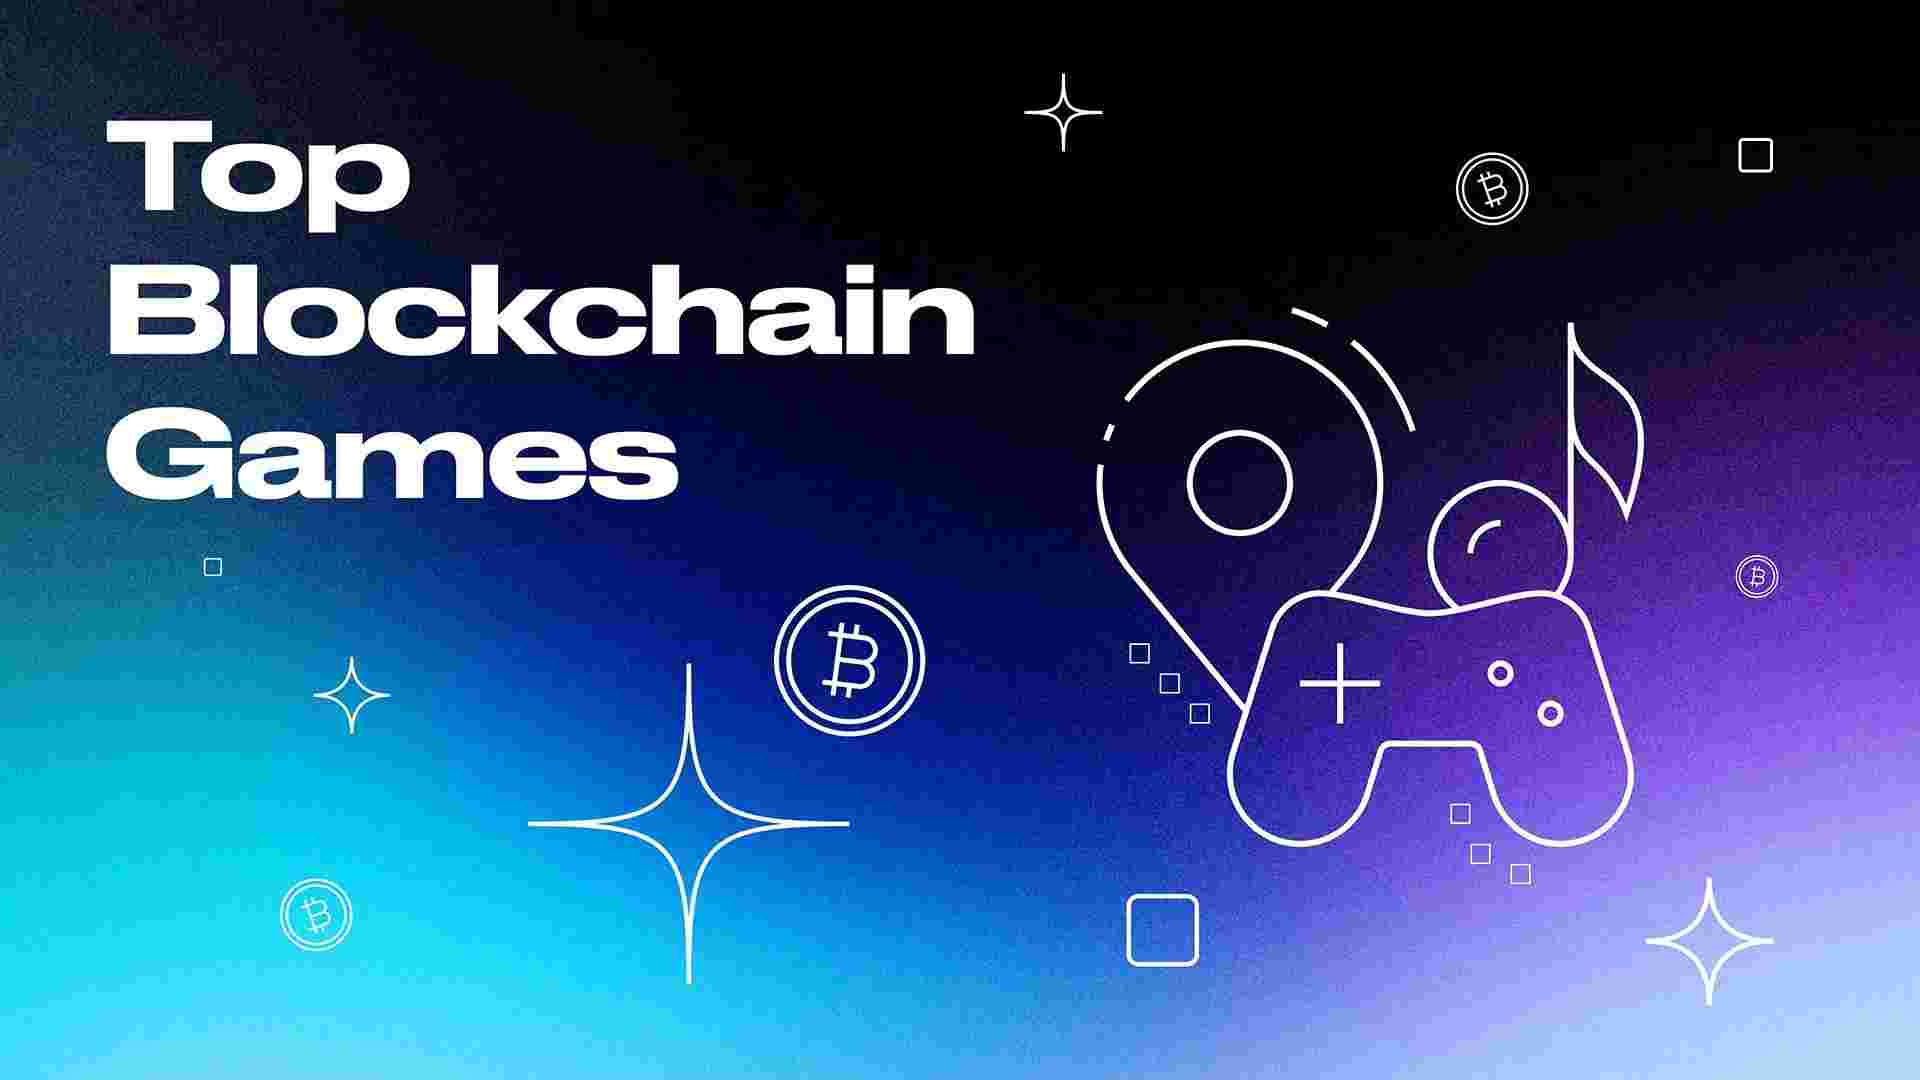 Blockchain Games: top gaming titles that make a difference